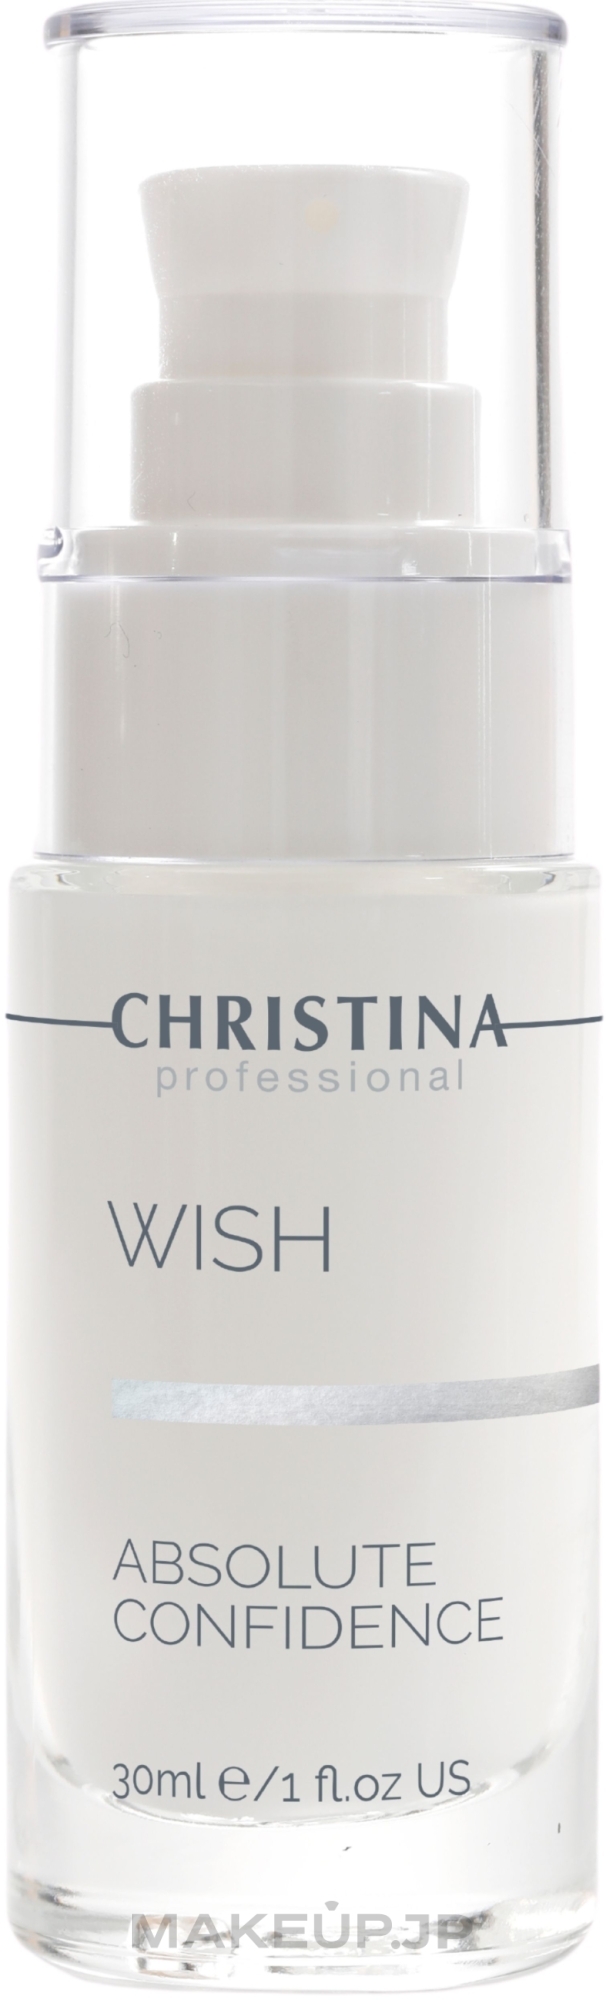 Serum 'Absolute Confidence' for Mimic Wrinkles Elimination - Christina Wish Absolute Confidence — photo 30 ml